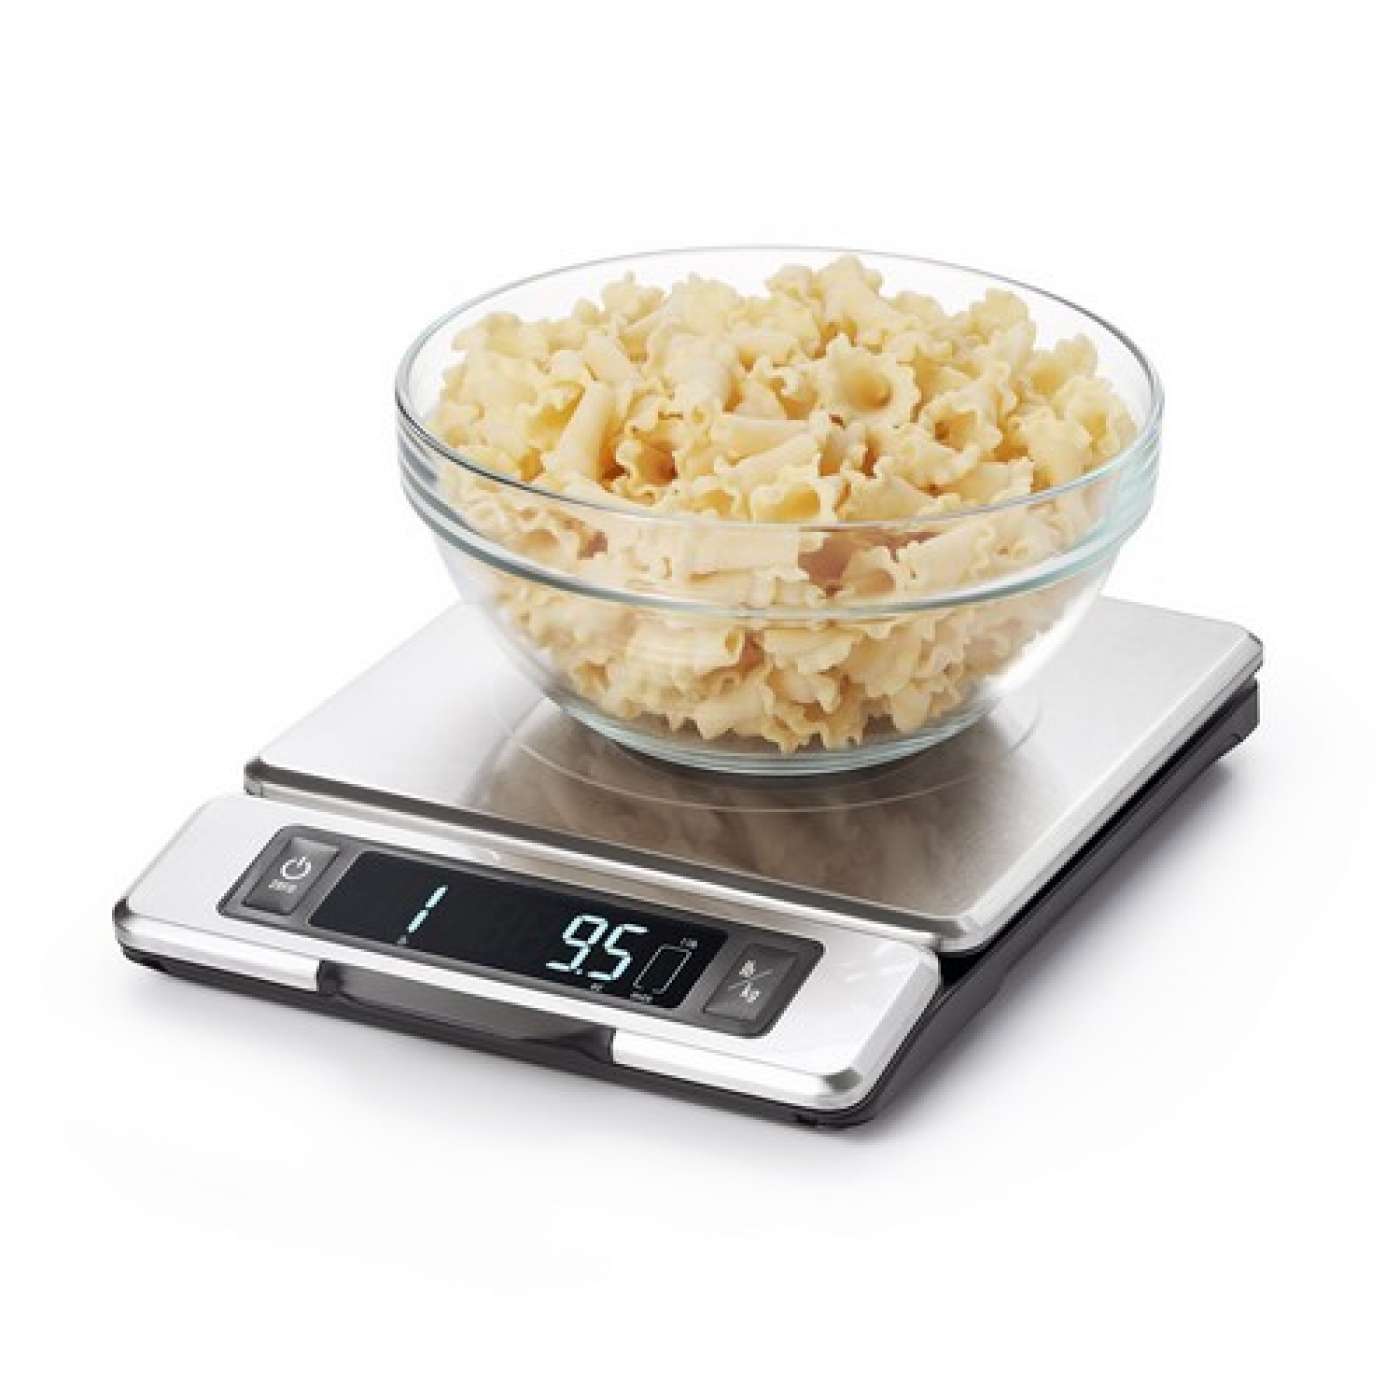 Stainless Steel Scale with Pull Out Display